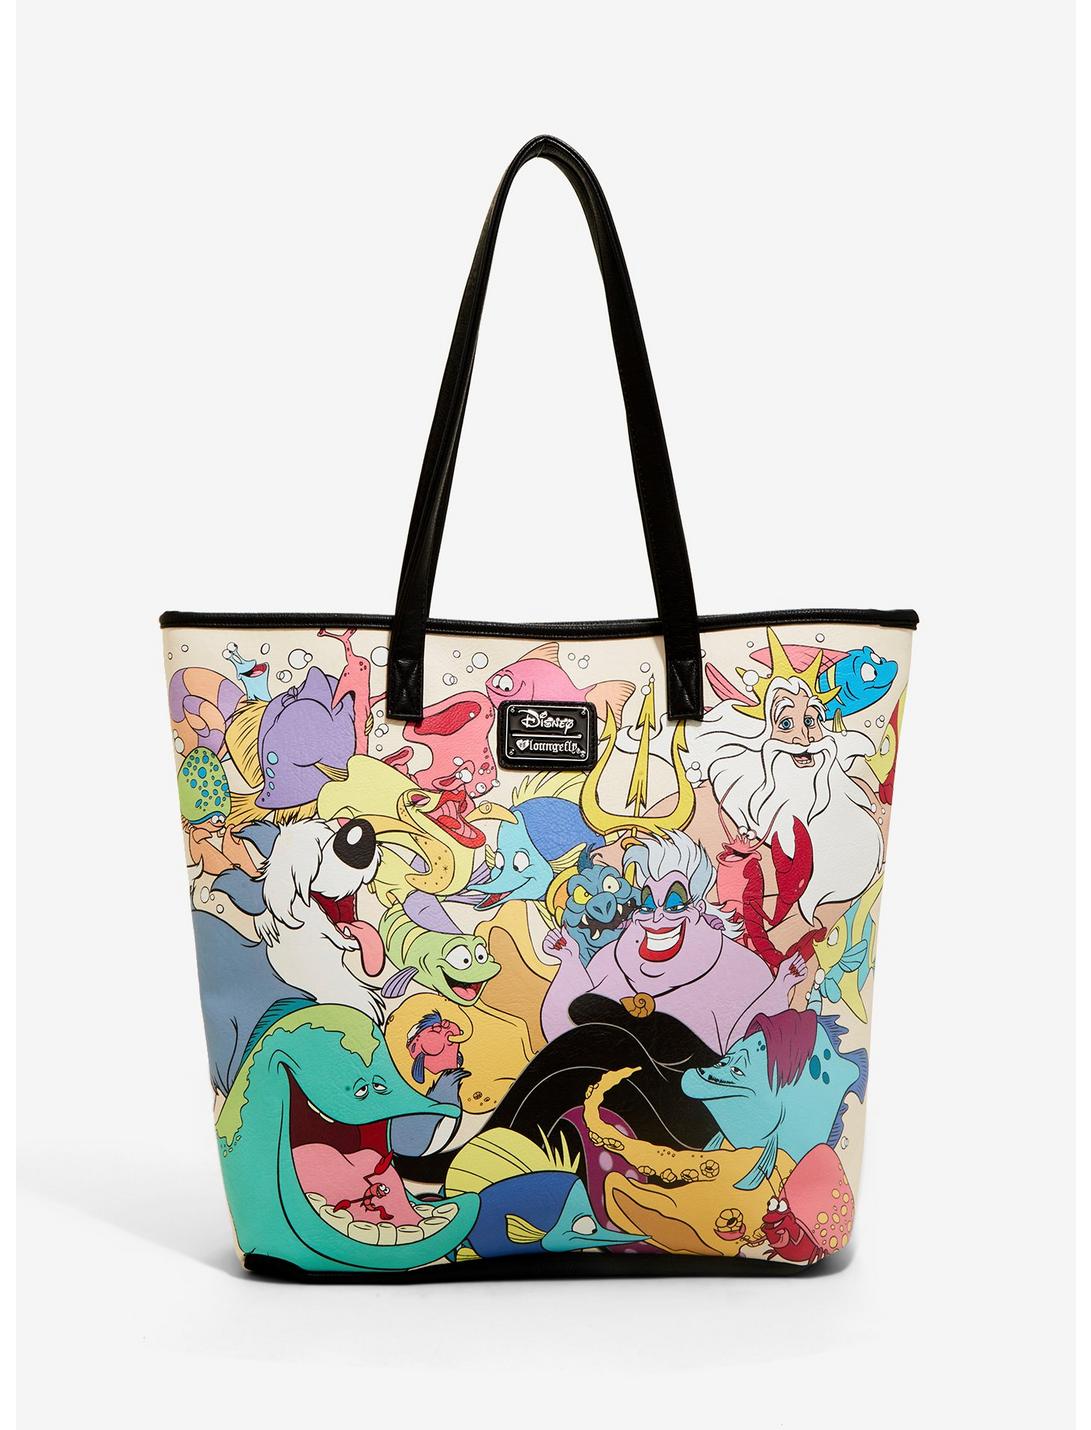 Loungefly Disney The Little Mermaid Character Tote, , hi-res